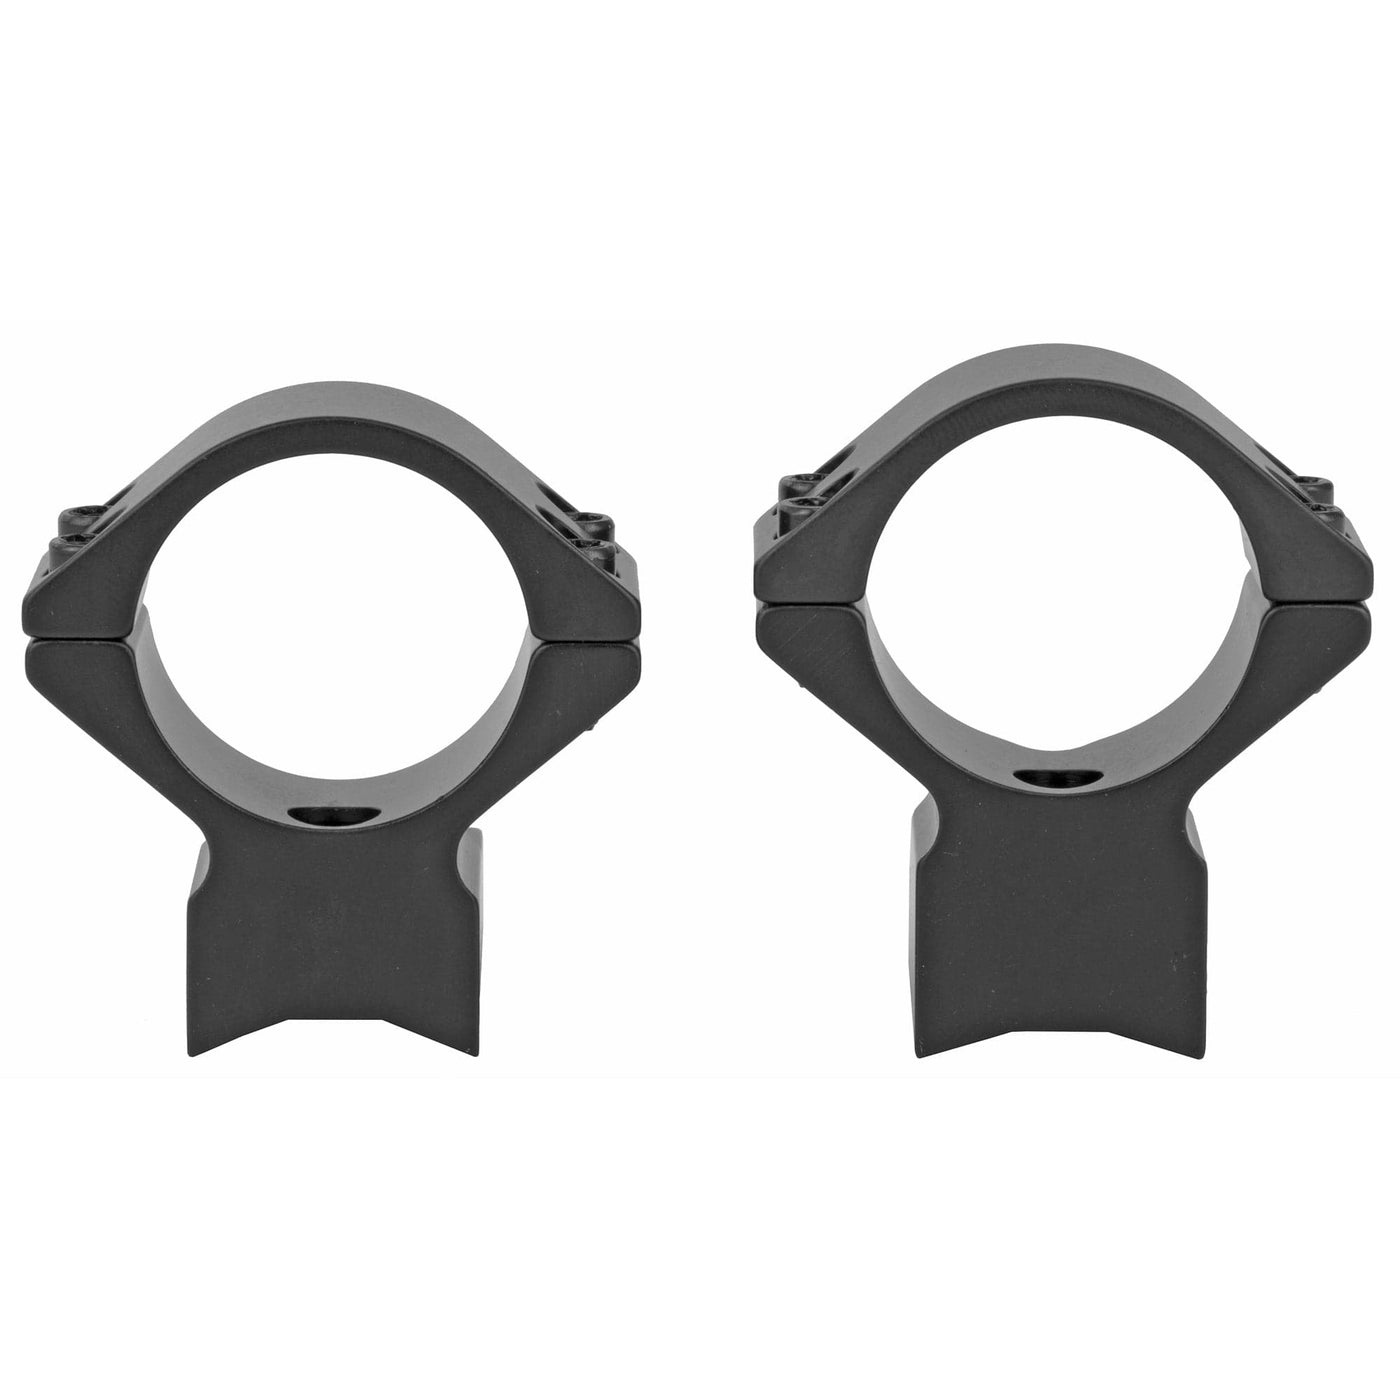 Talley Manufacturing Talley Lw Rings Kimber 8400 1" Med Scope Mounts